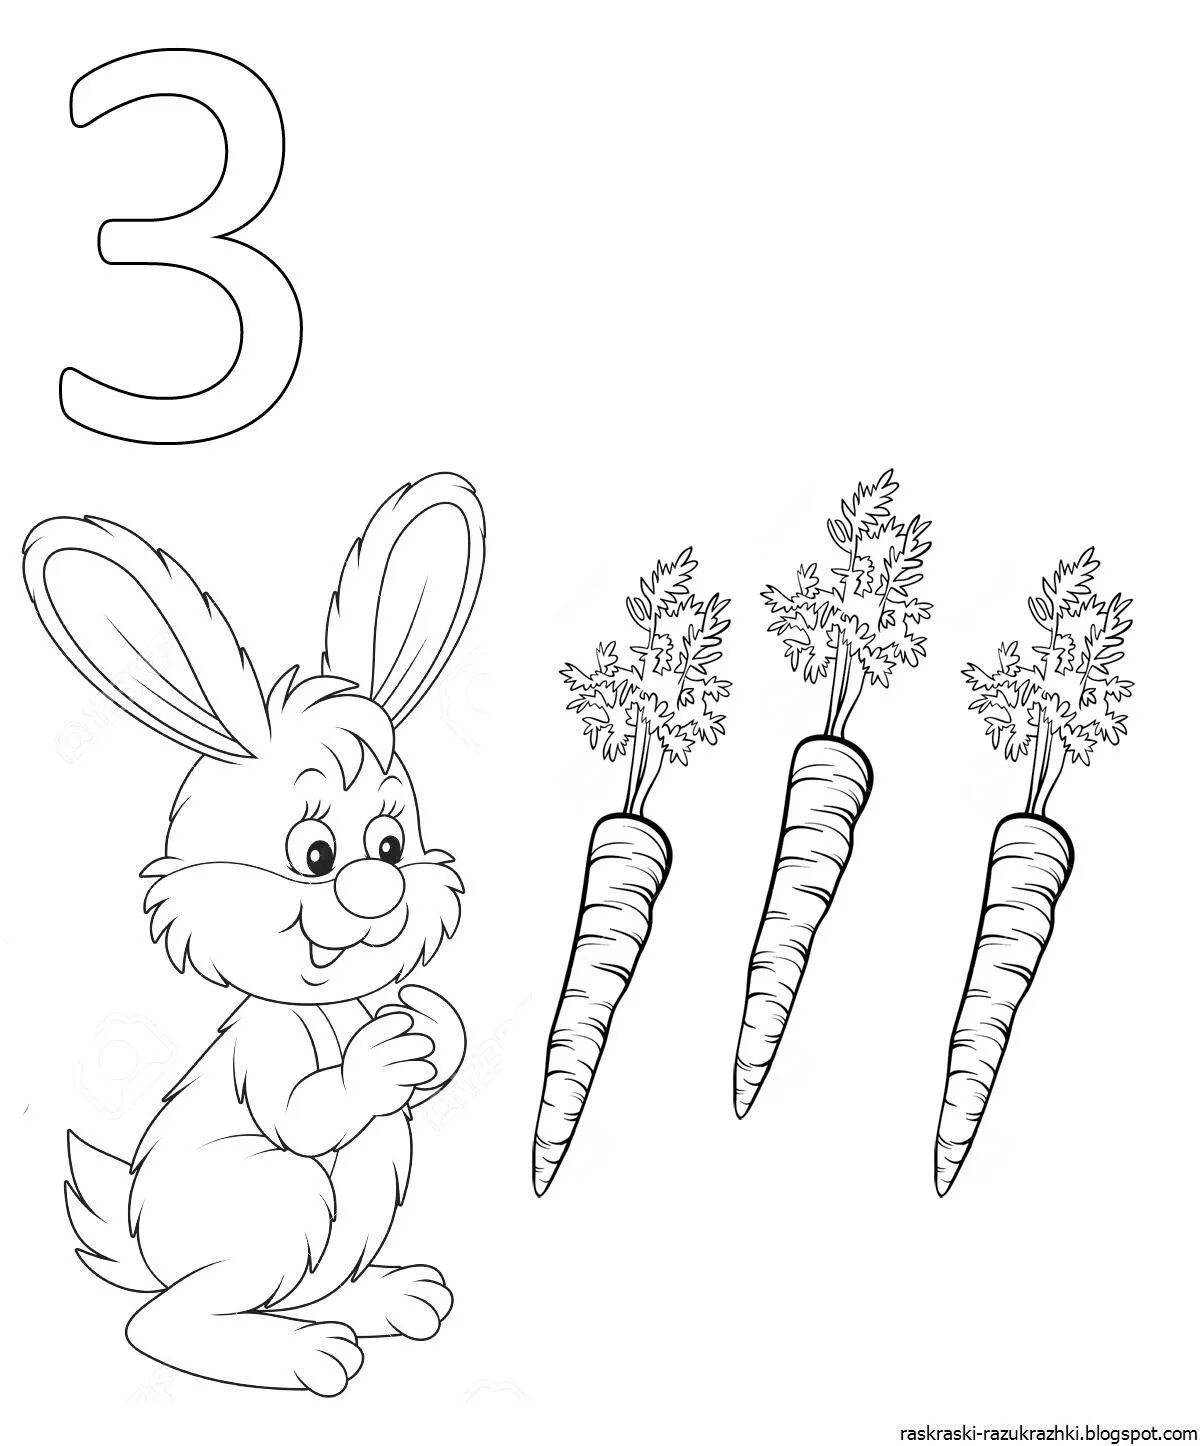 Fun counting up to 10 coloring pages for kids